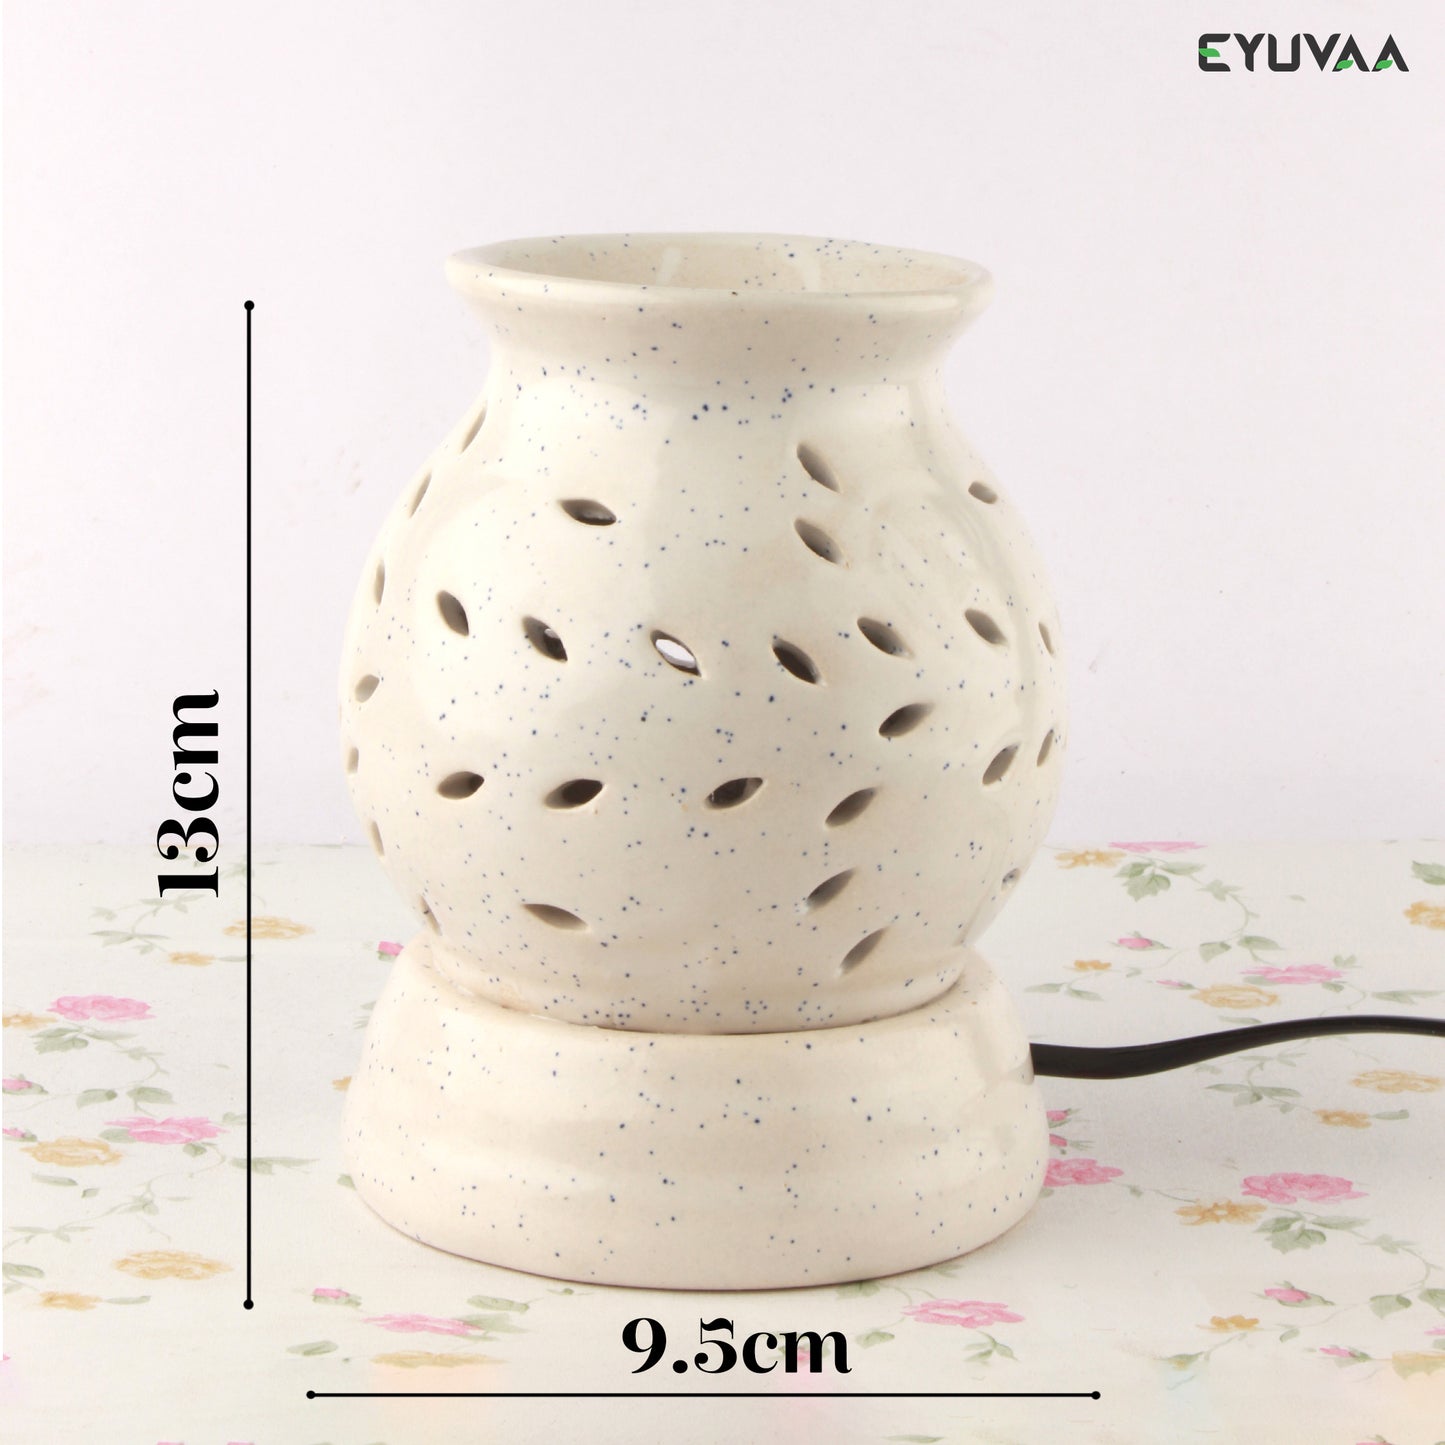 Ethnic Electric Aroma Burner Diffuser Set for Home Fragrance, Aroma Oil Warmer Cum Night lamp with 10ml Essential Oil (White)